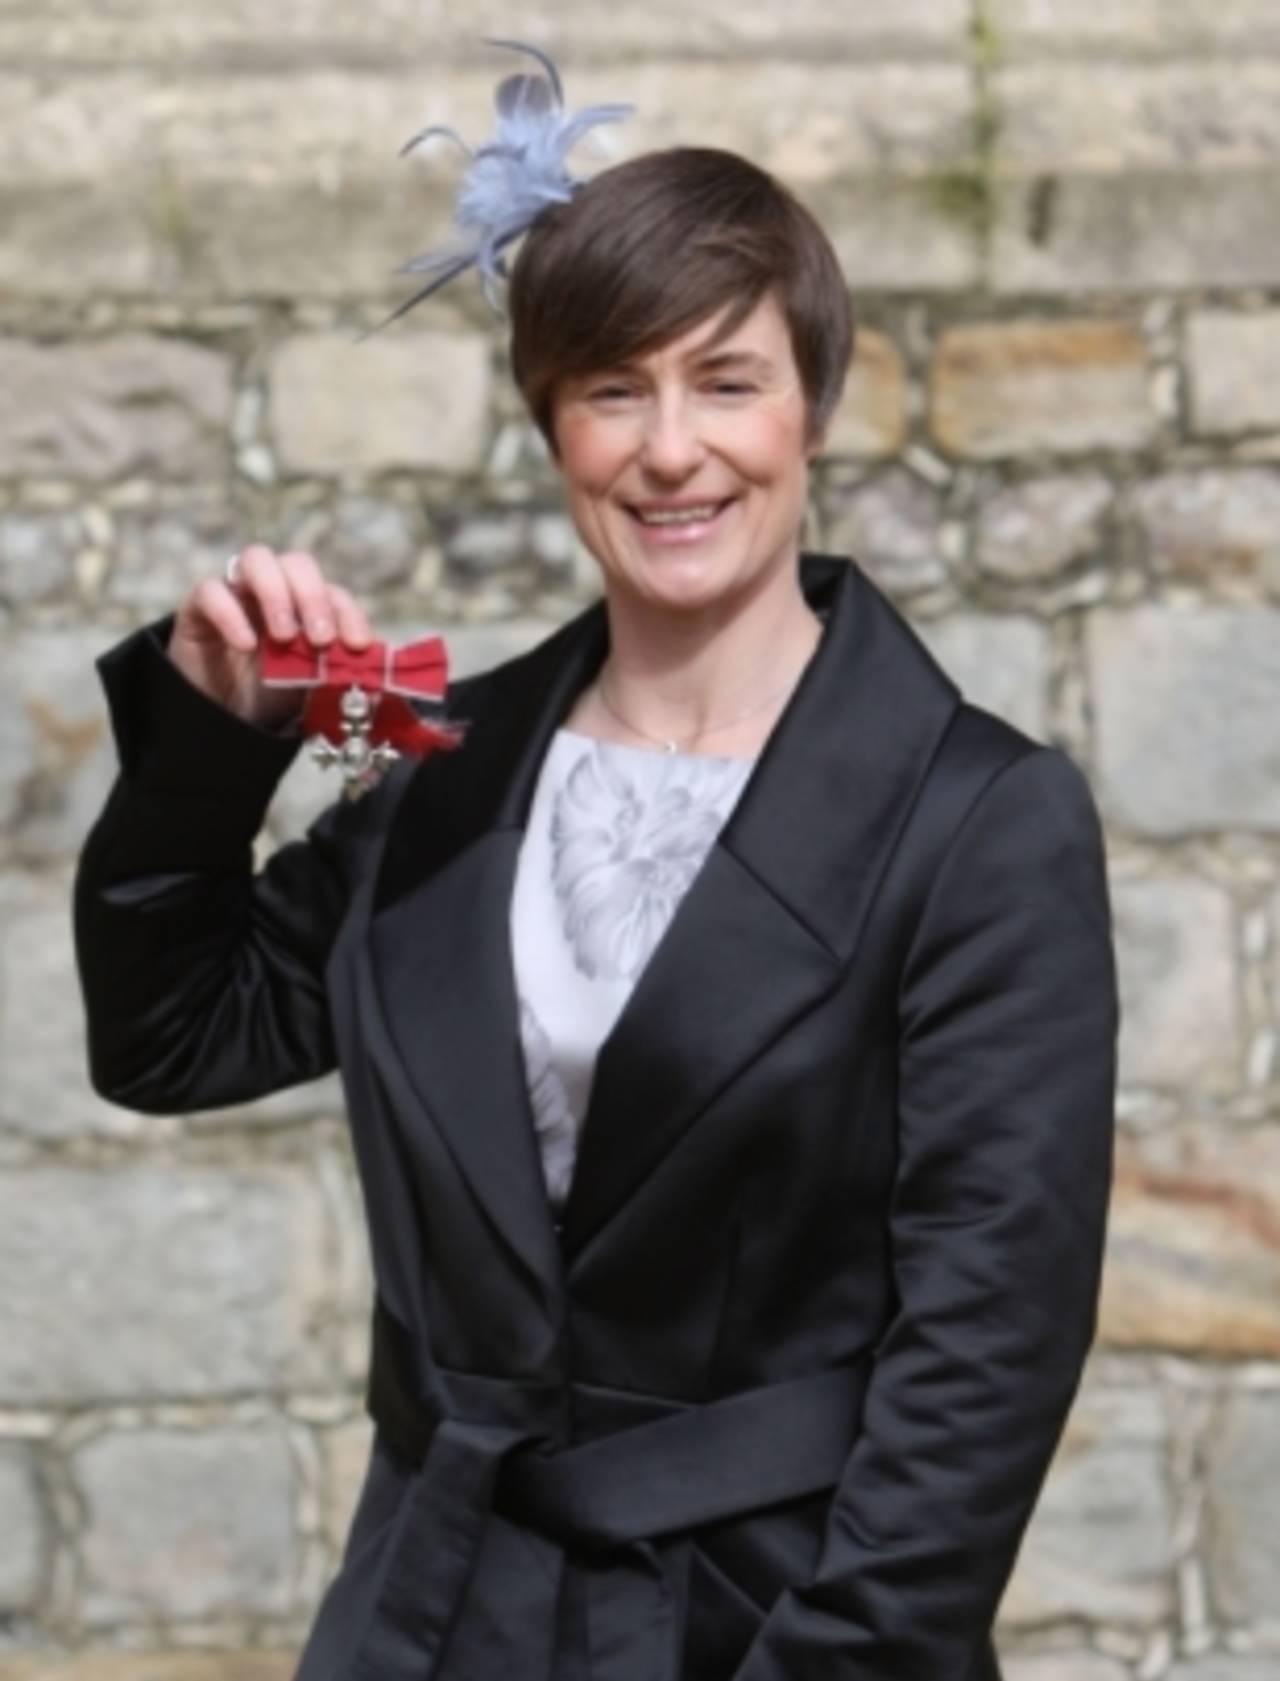 Claire Taylor's MBE caps off a successful year for her&nbsp;&nbsp;&bull;&nbsp;&nbsp;Getty Images